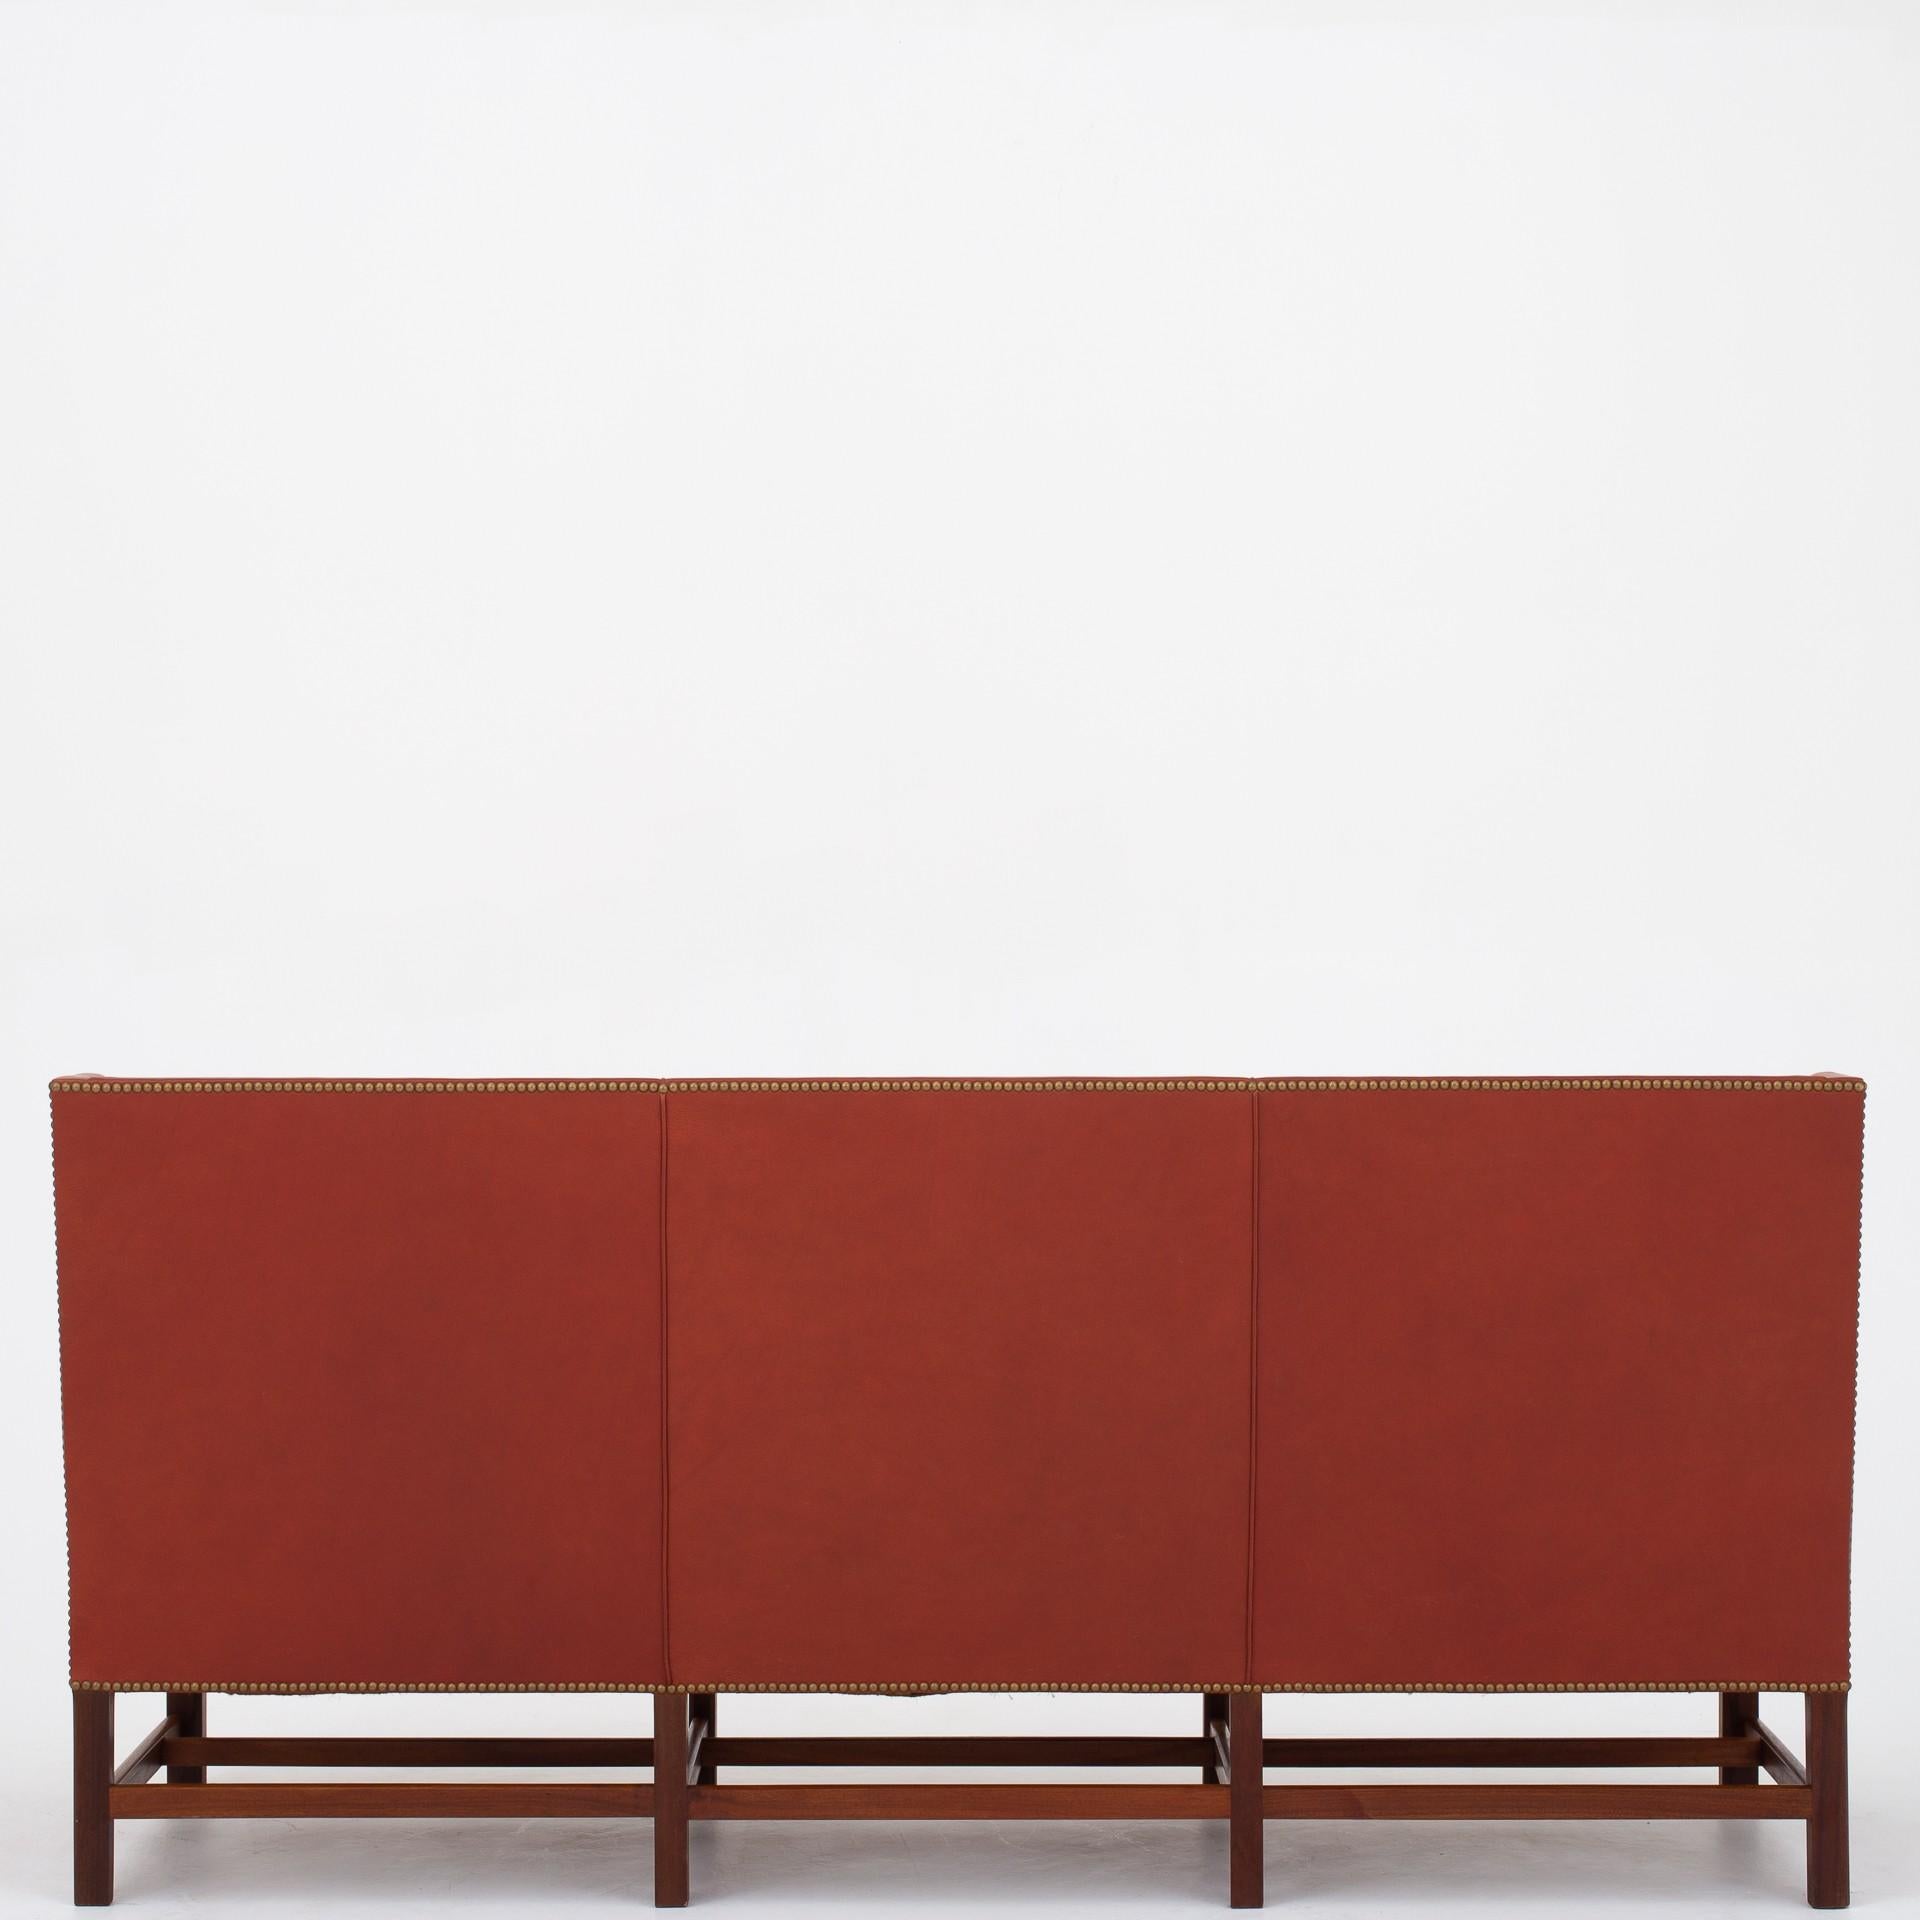 KK 5011 - Sofa in original red, stitched leather with frame in mahogany. Maker Rud. Rasmussen.